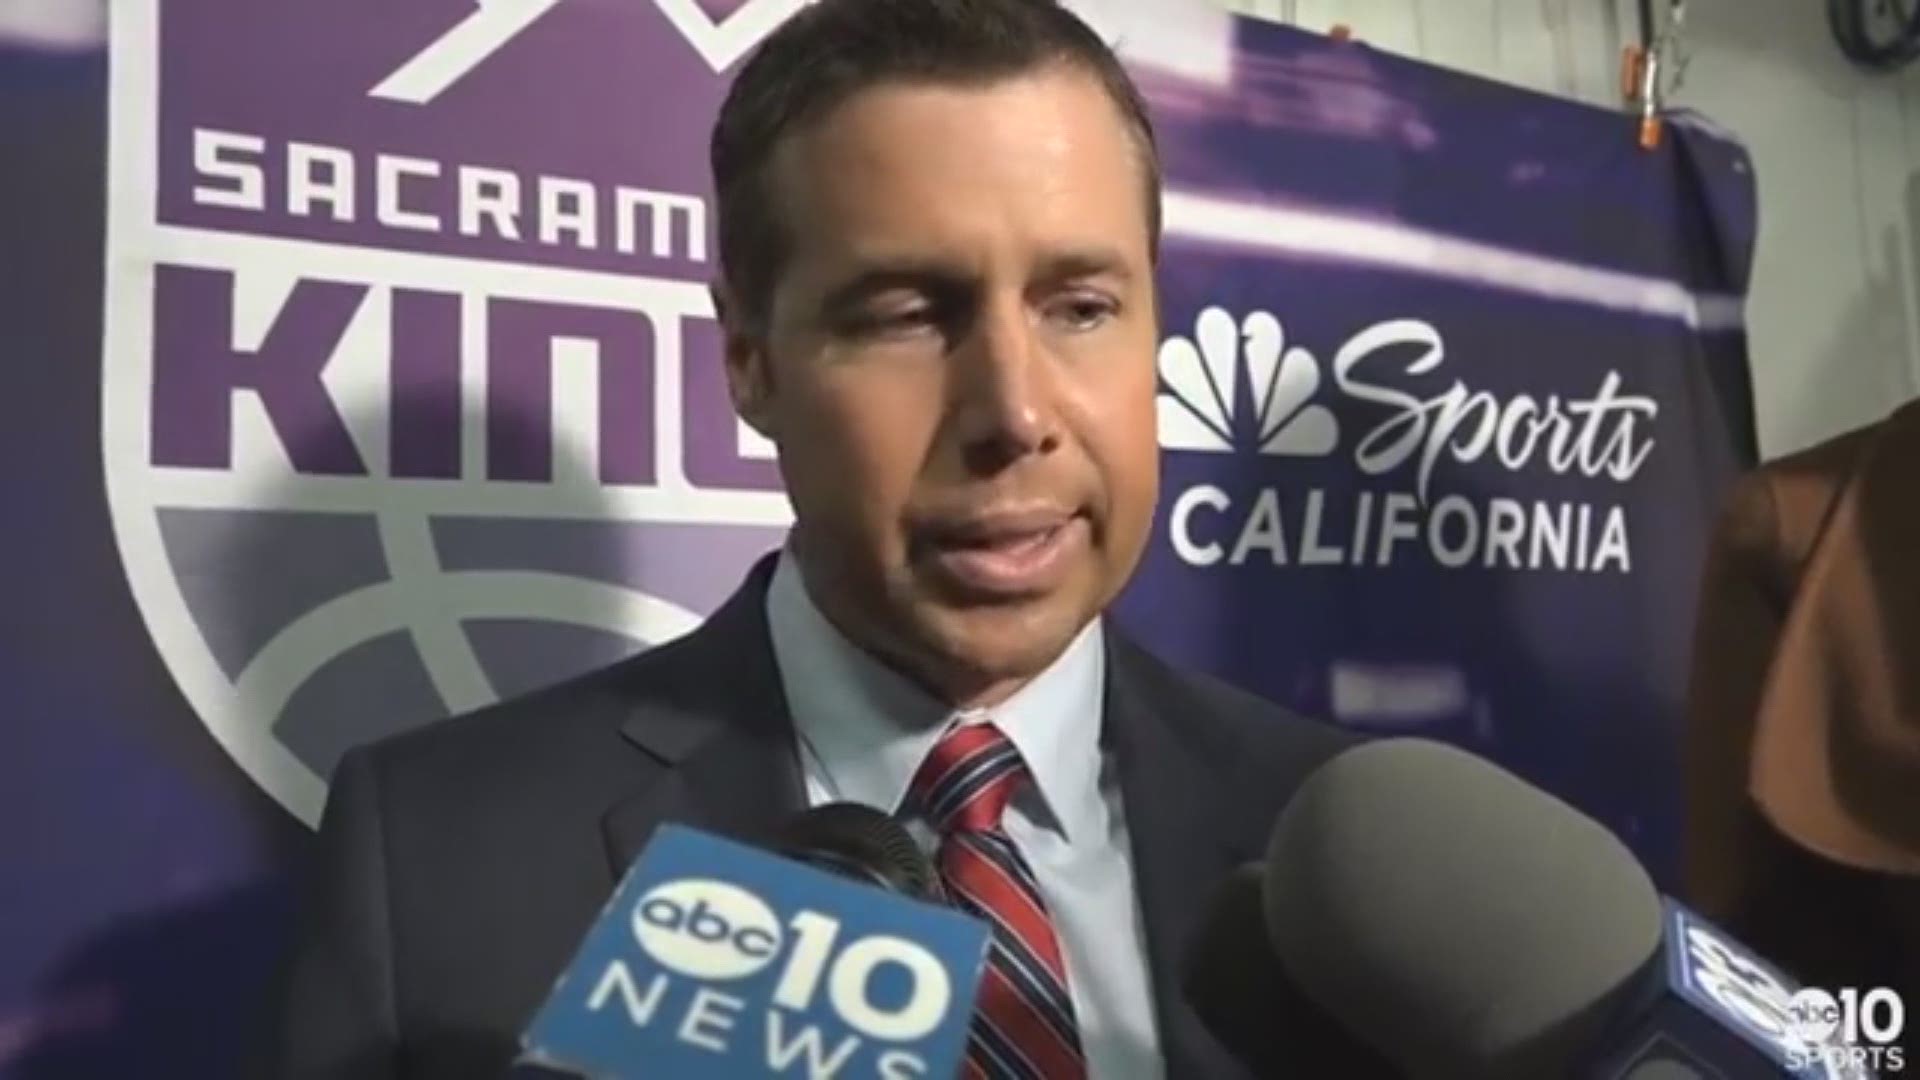 Kings head coach Dave Joerger talks about his team's resiliency in Thursday's down-down-to-the-wire loss to the Golden State Warriors in Oakland, the competitive season series and possibility of meeting them in the playoffs.